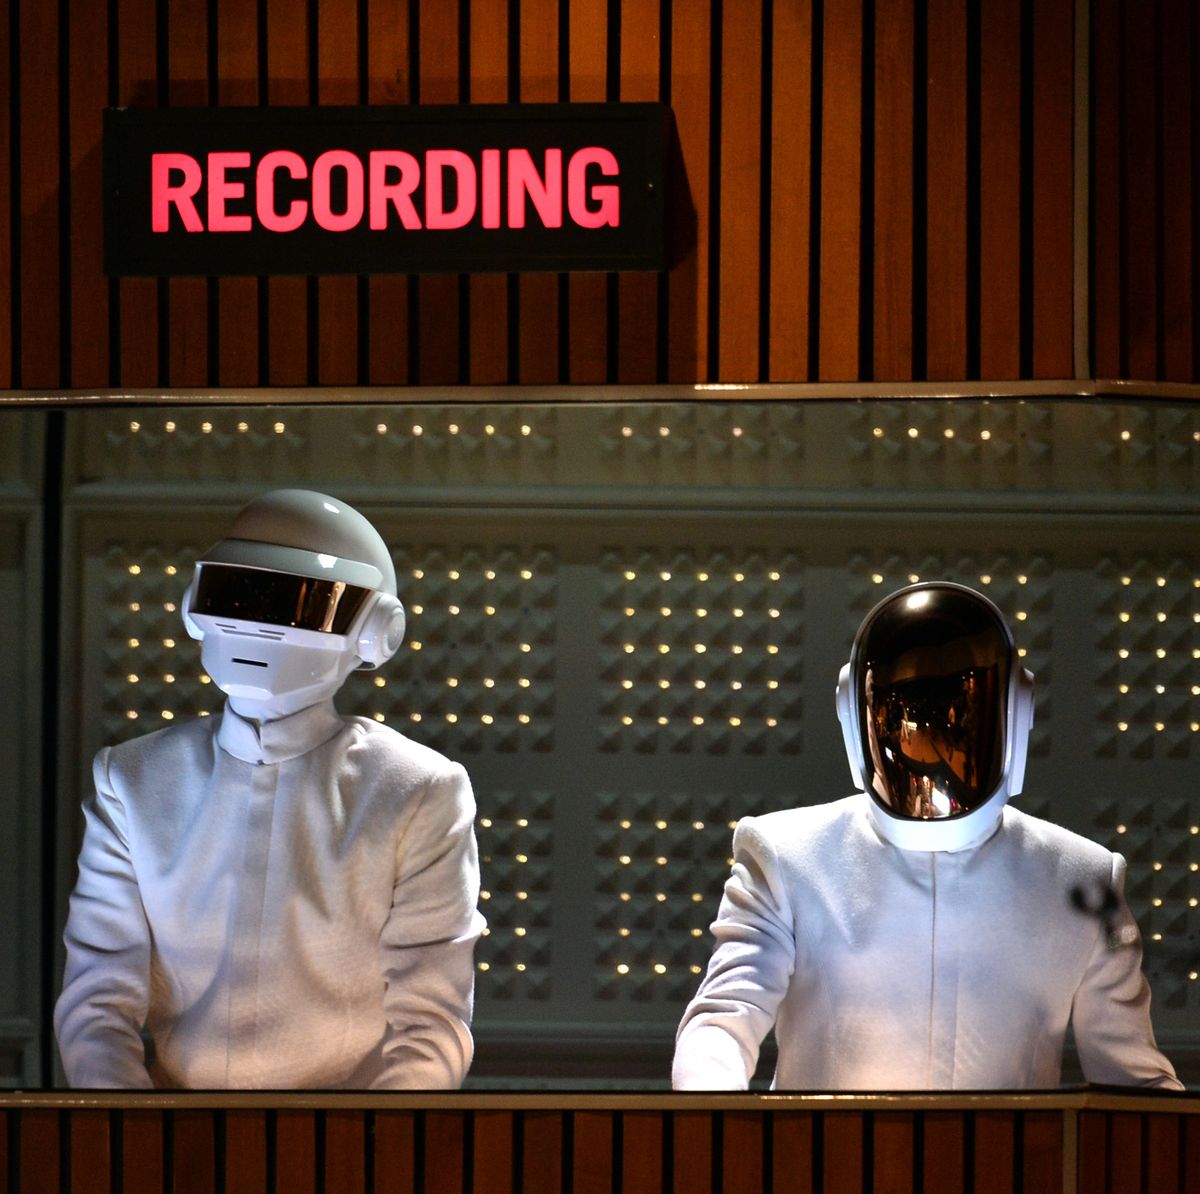 Here's Daft Punk Without Helmets - What Daft Punk's Faces Look Like IRL